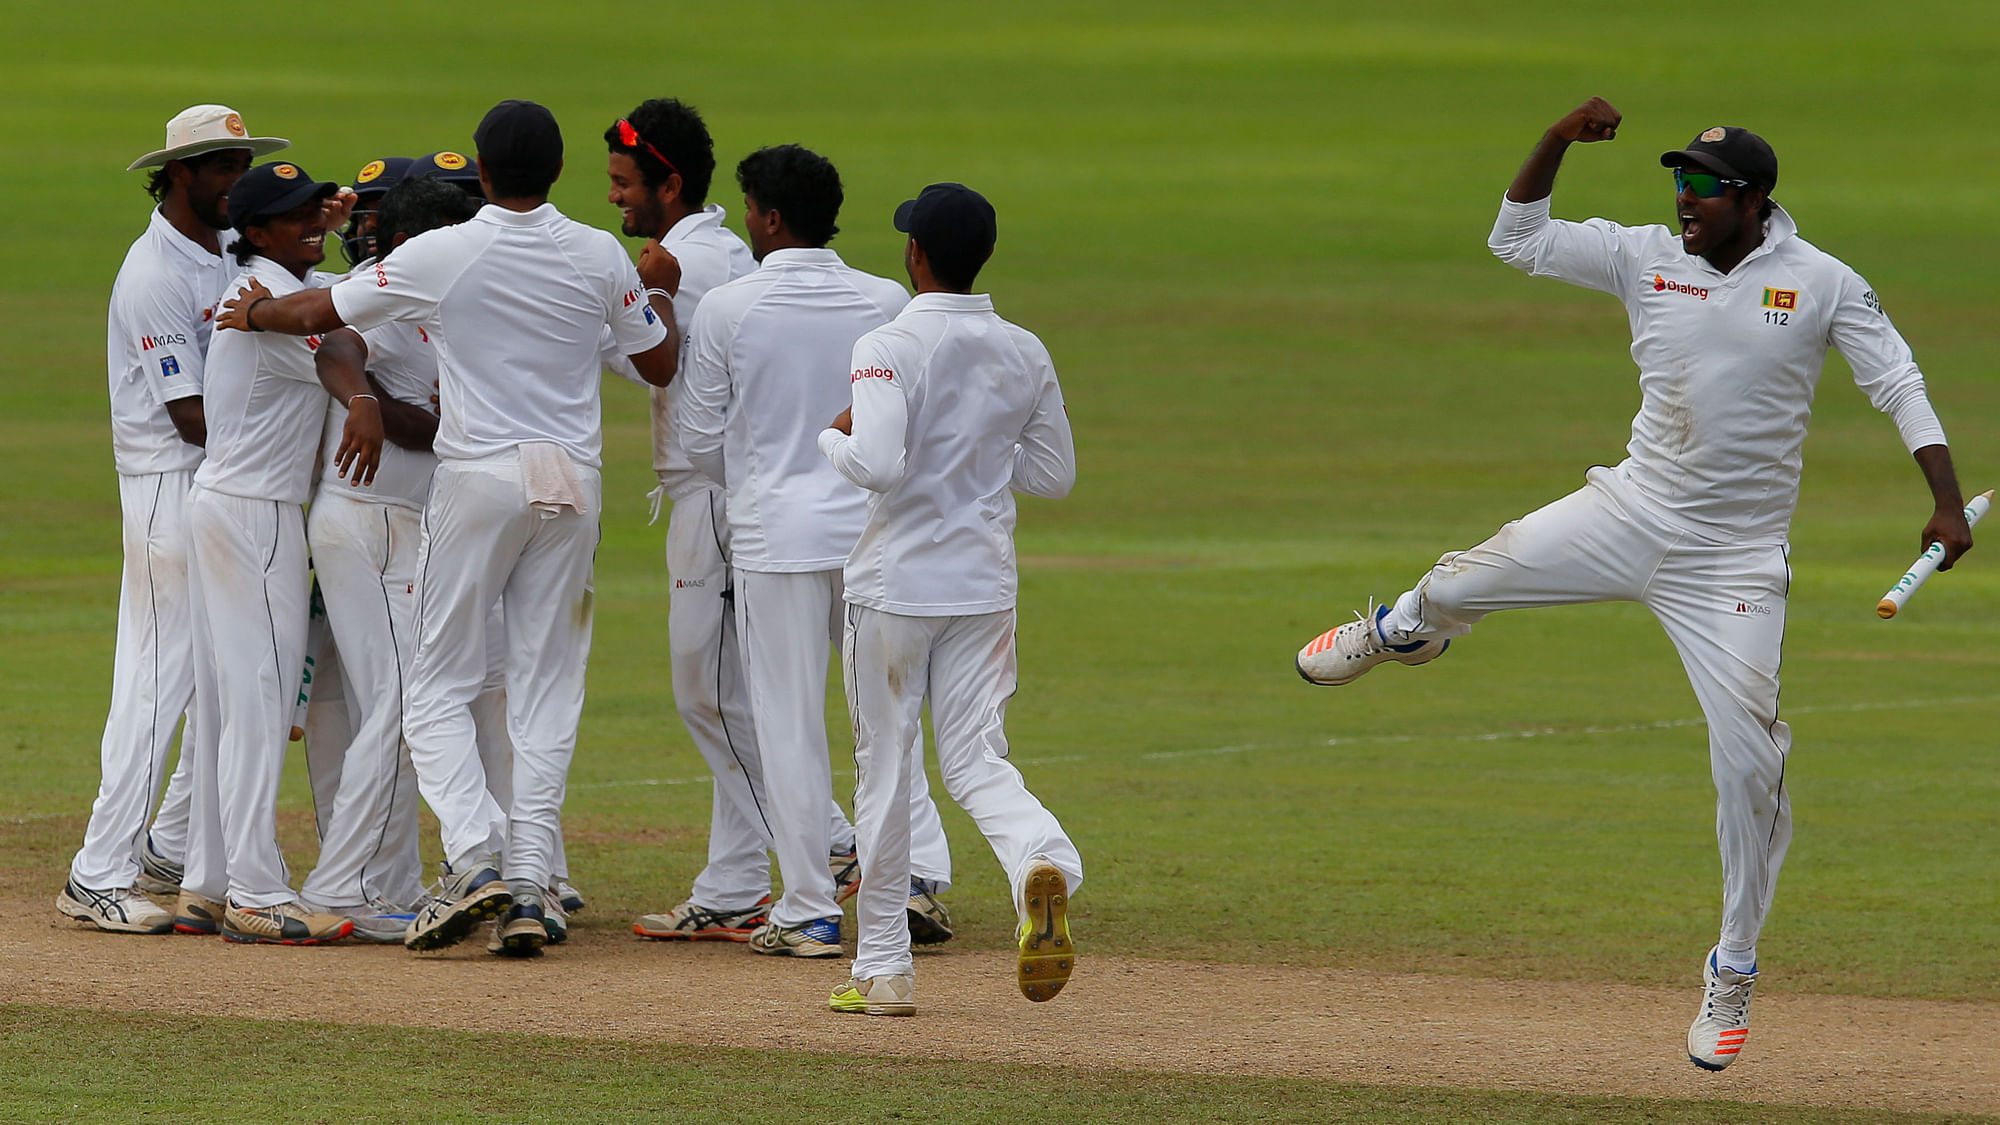 Sri Lankan captain Angelo Mathews celebrates with his team mates after defeating Australia by 106 runs in the 1st Test Match at Pallekele. (Photo: AP)